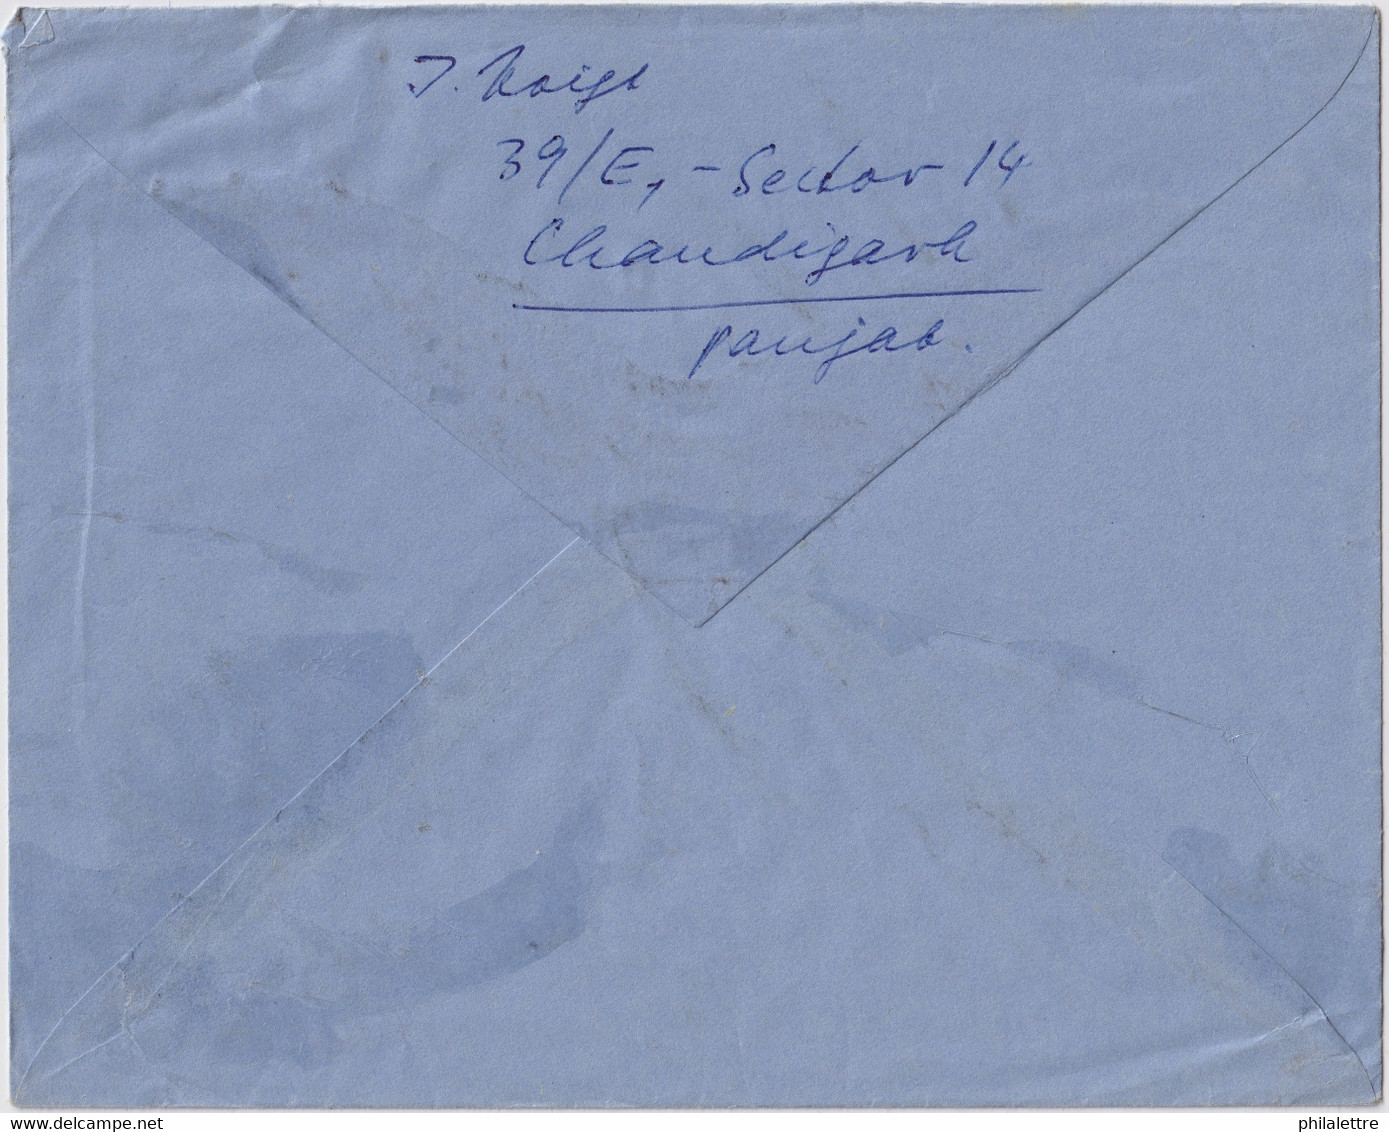 INDE / INDIA - 1962 - Air Mail Postal Envelope From CHANDIGARH To Kiel, Germany - Aerograms